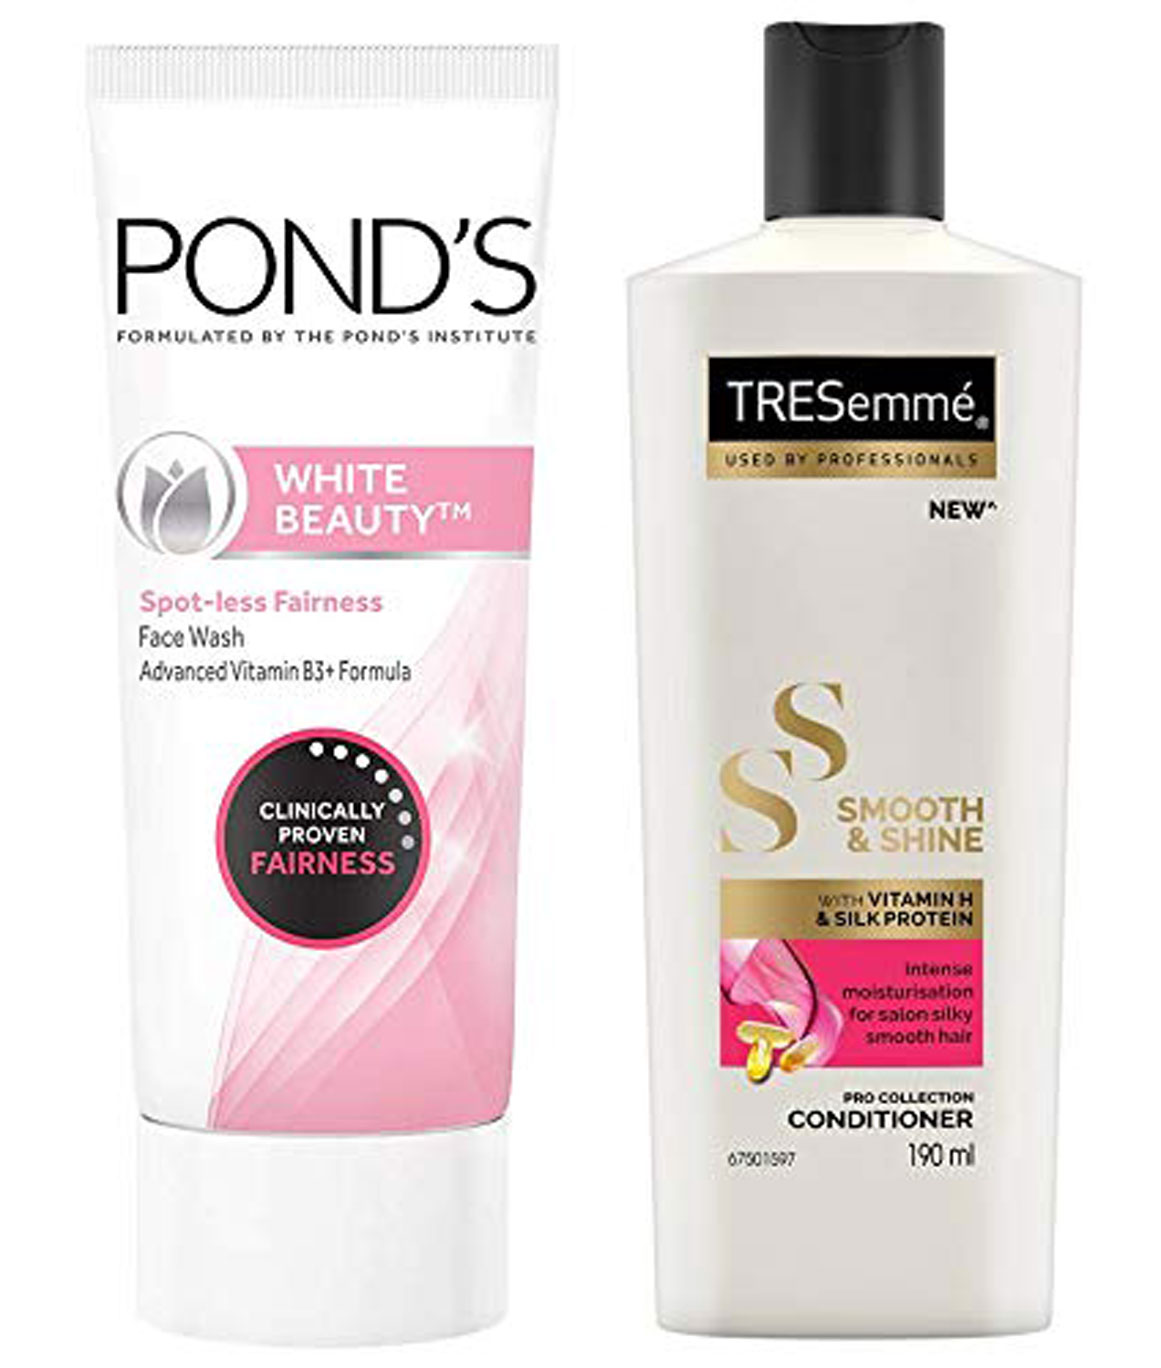 Ponds White Beauty Spot Less Fairness Face Wash, 200 gm & TRESemme Smooth and Shine Conditioner, 190ml